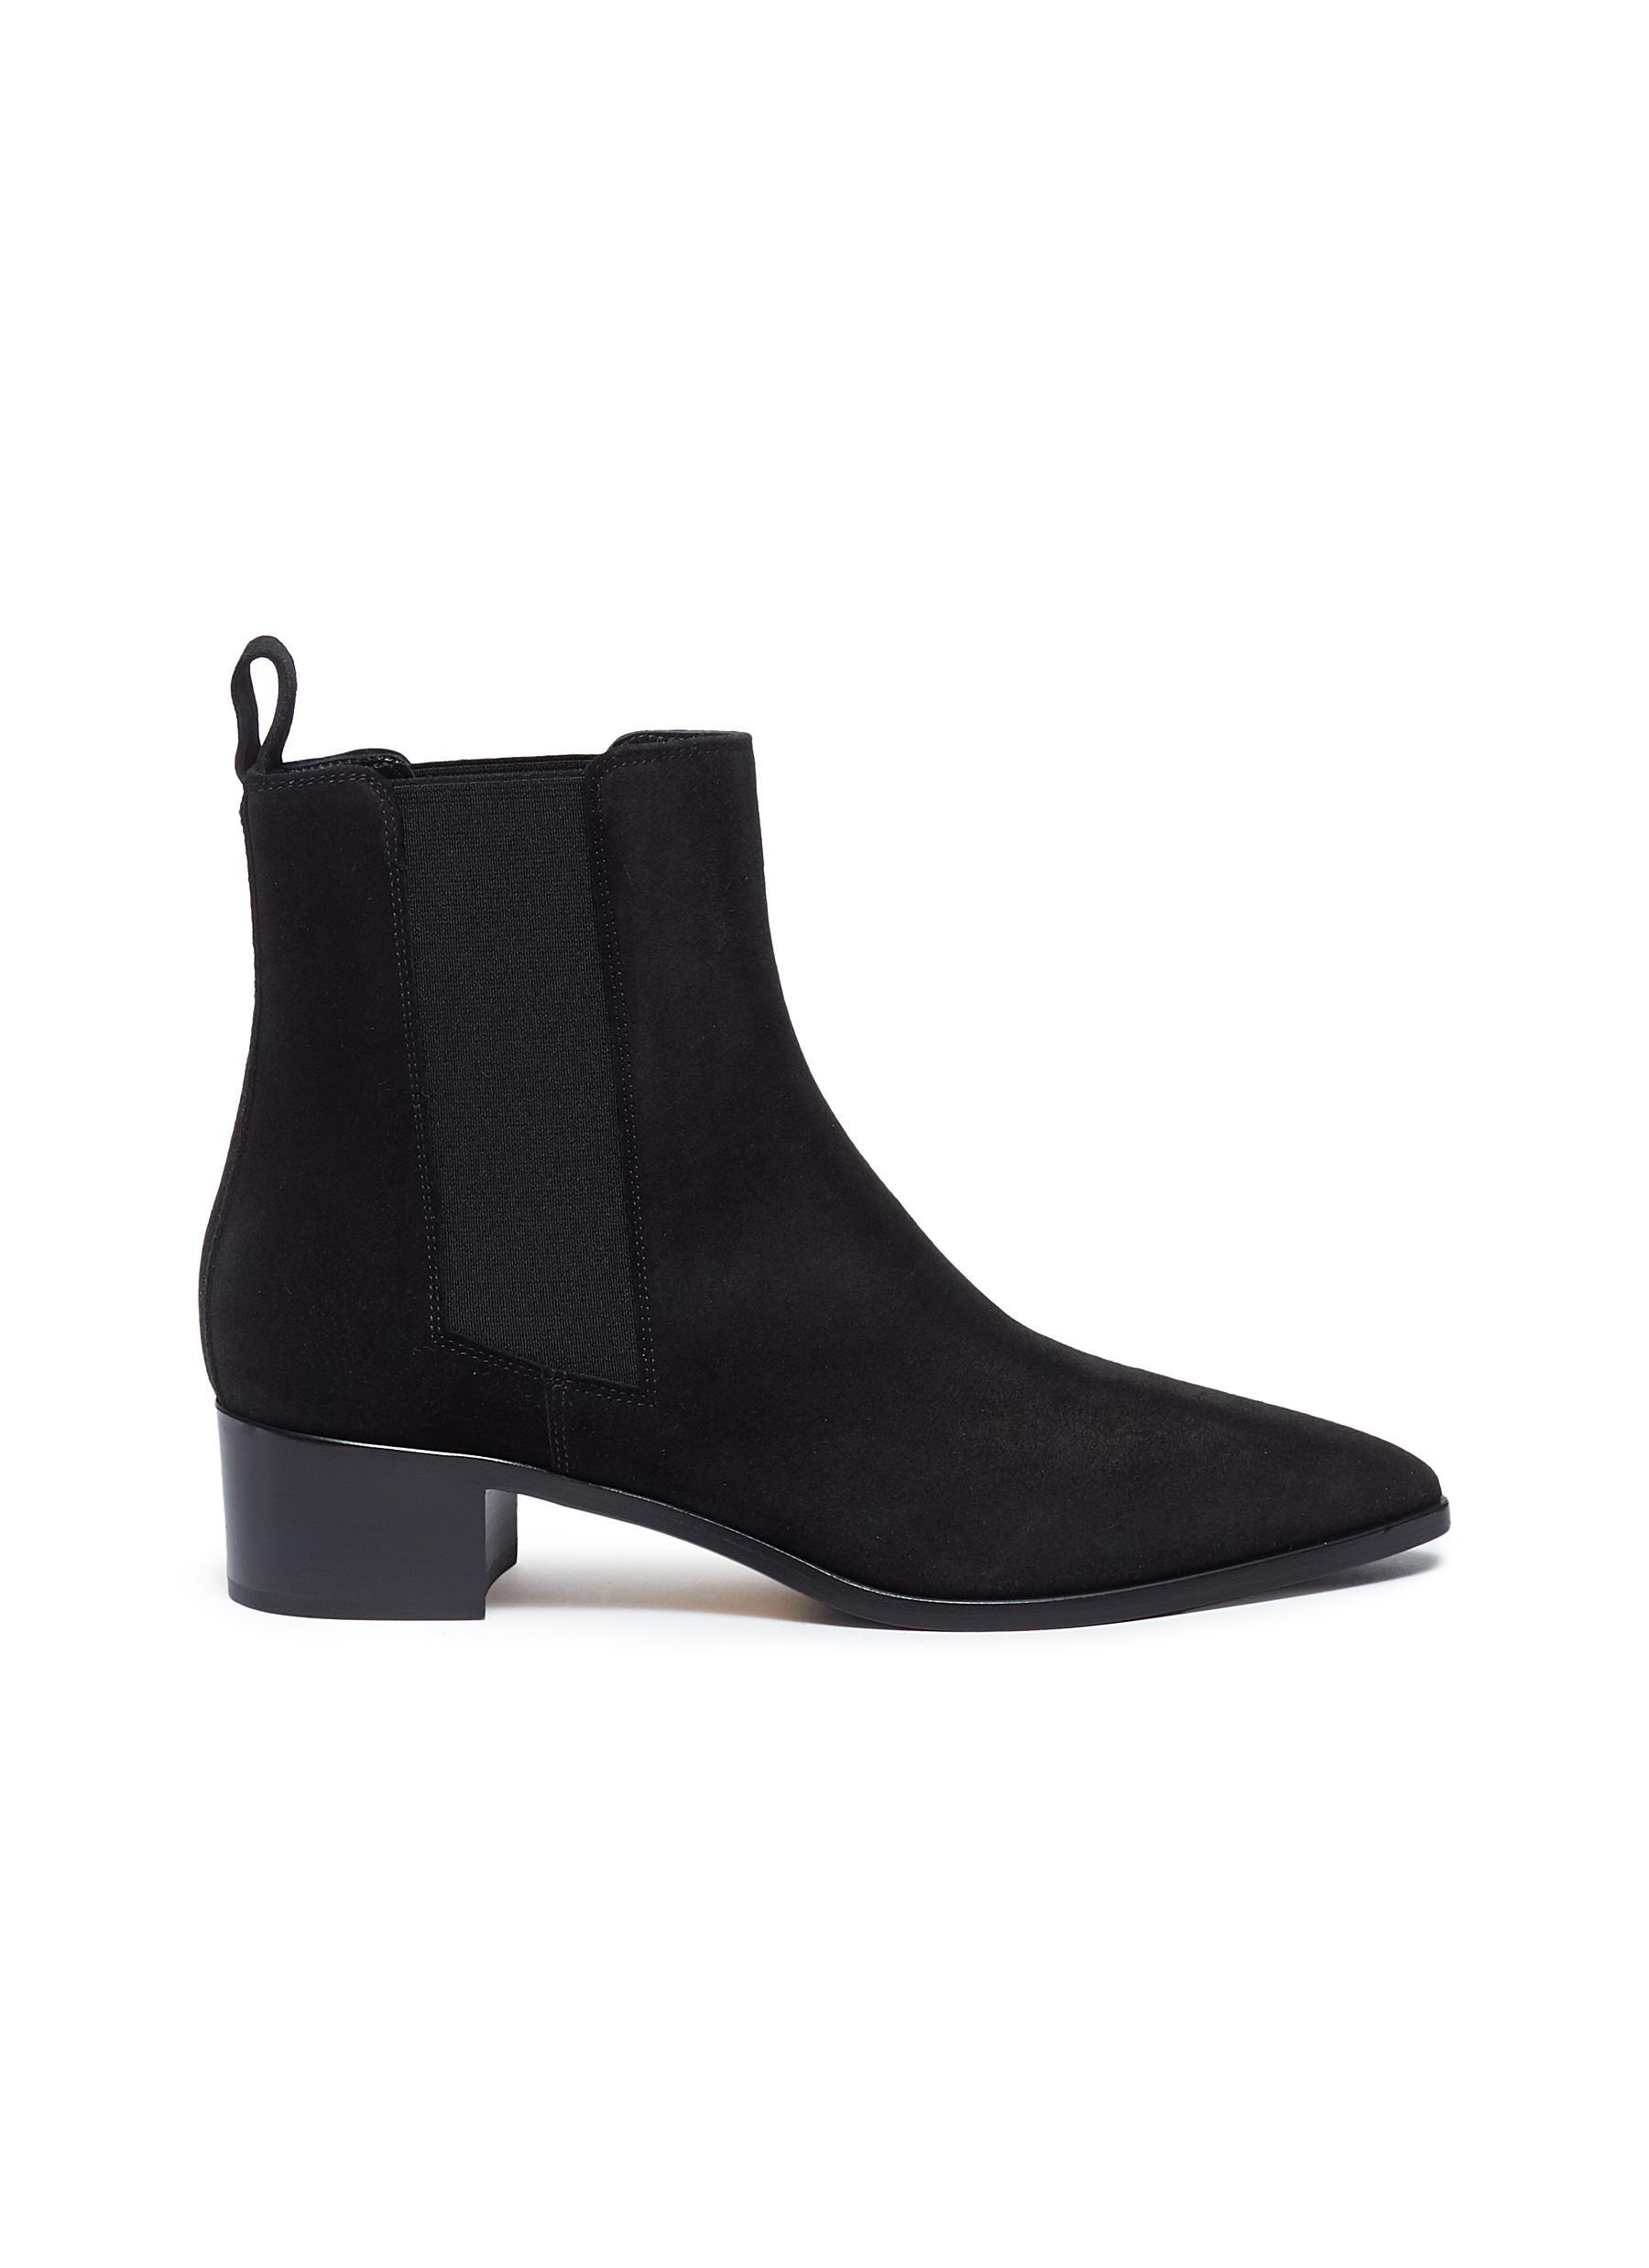 Aeyde 'lou' Suede Chelsea Boots in Black - Lyst